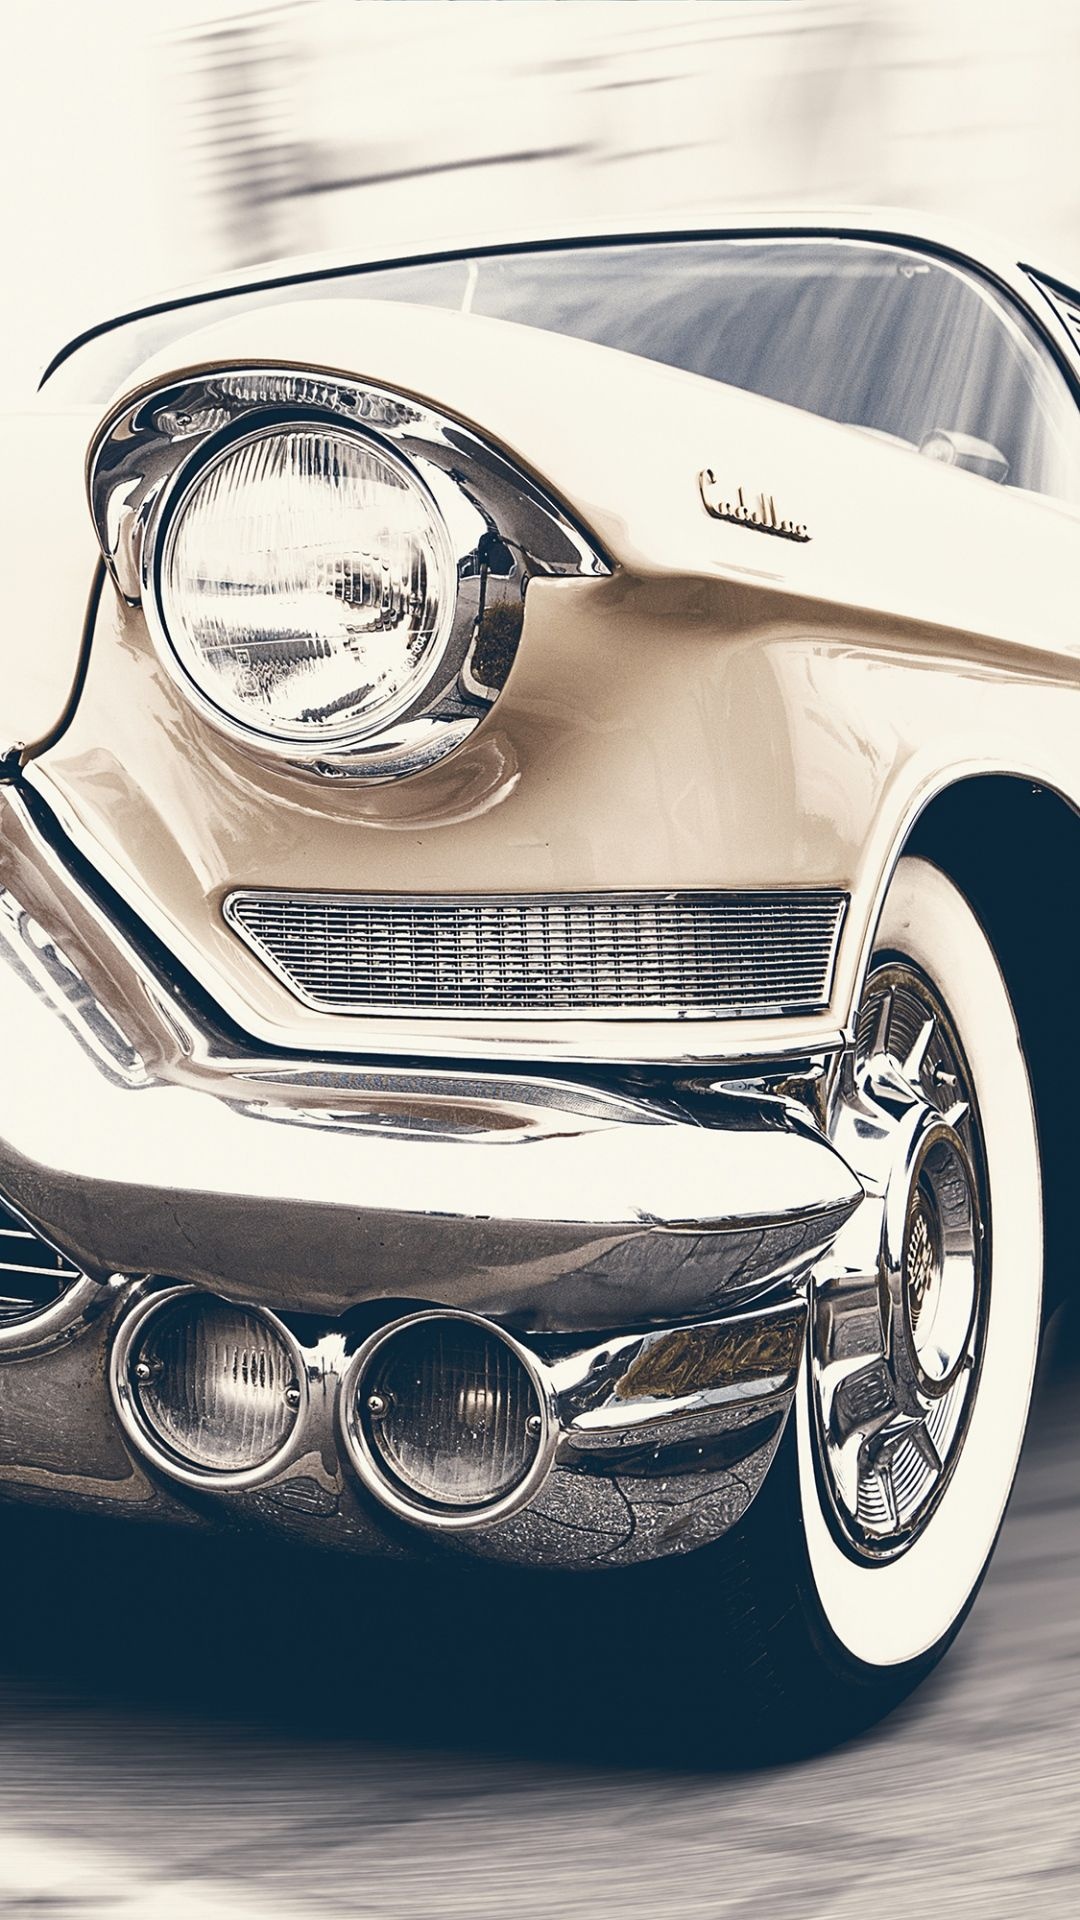 Vintage Car: A closer connection to the road and mechanical components. 1080x1920 Full HD Wallpaper.